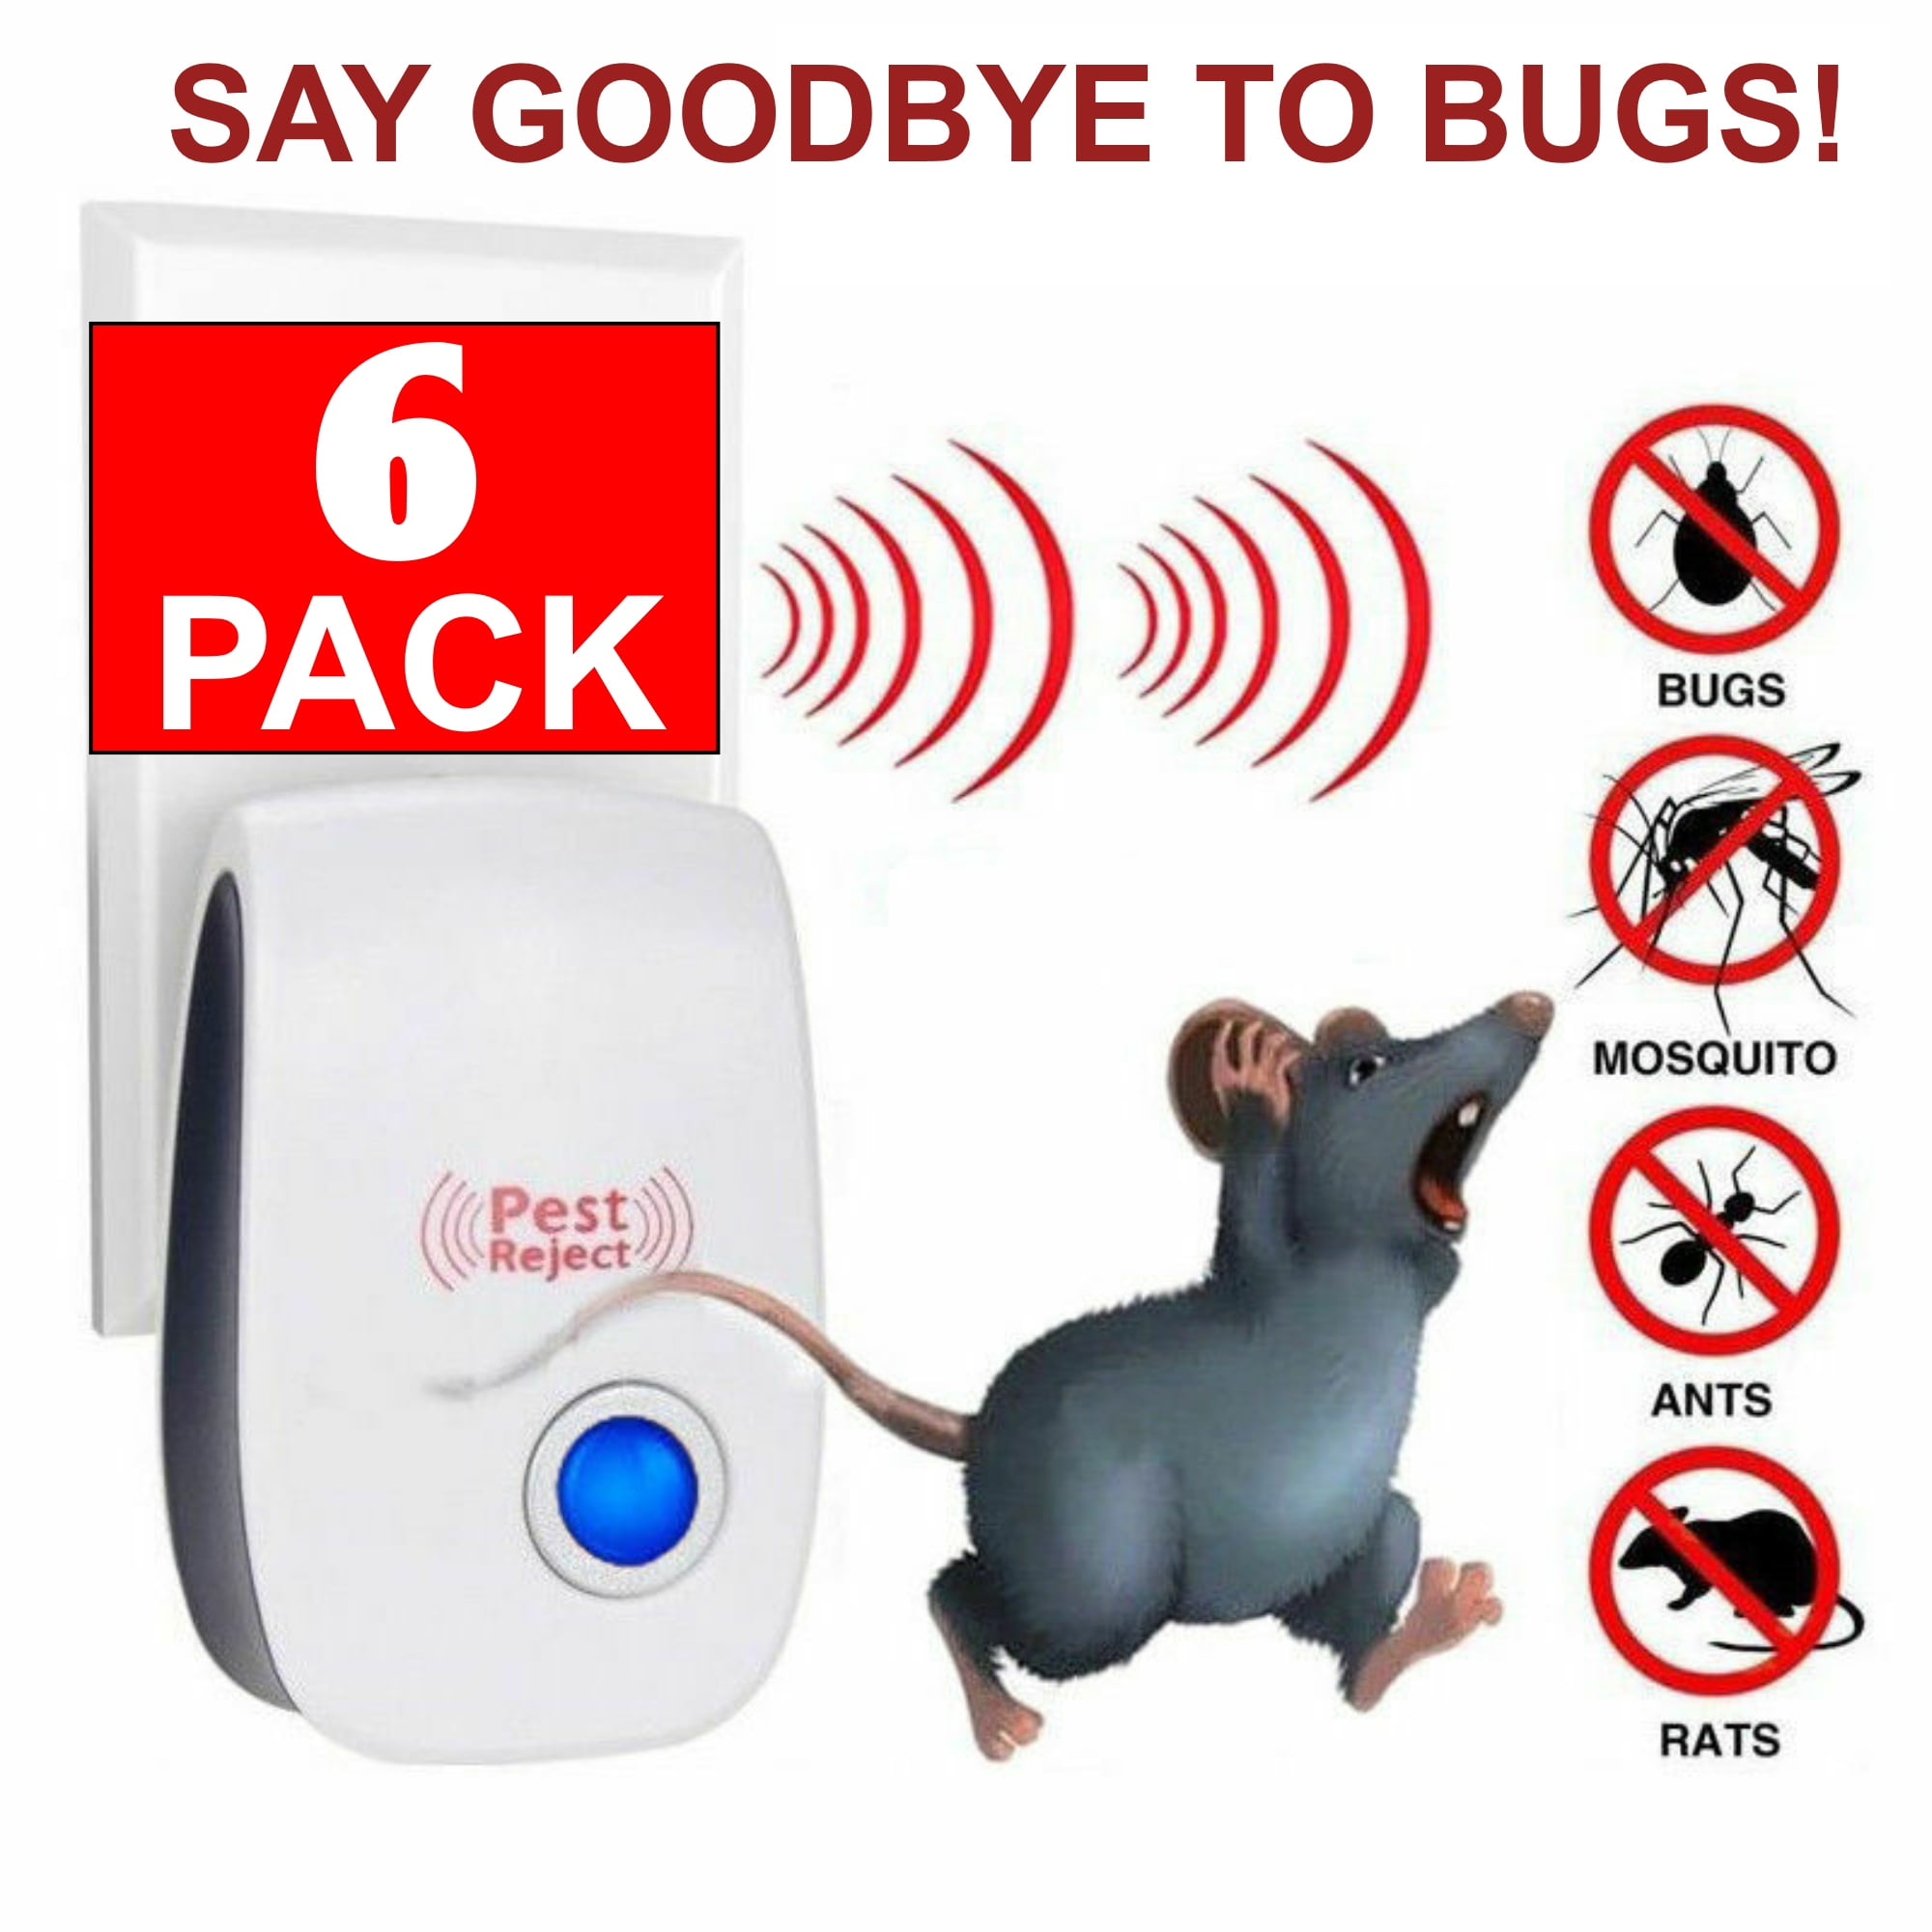 6 Pack Ultrasonic Pest Repeller Electronic Control Repellent Mice Rat Reject 